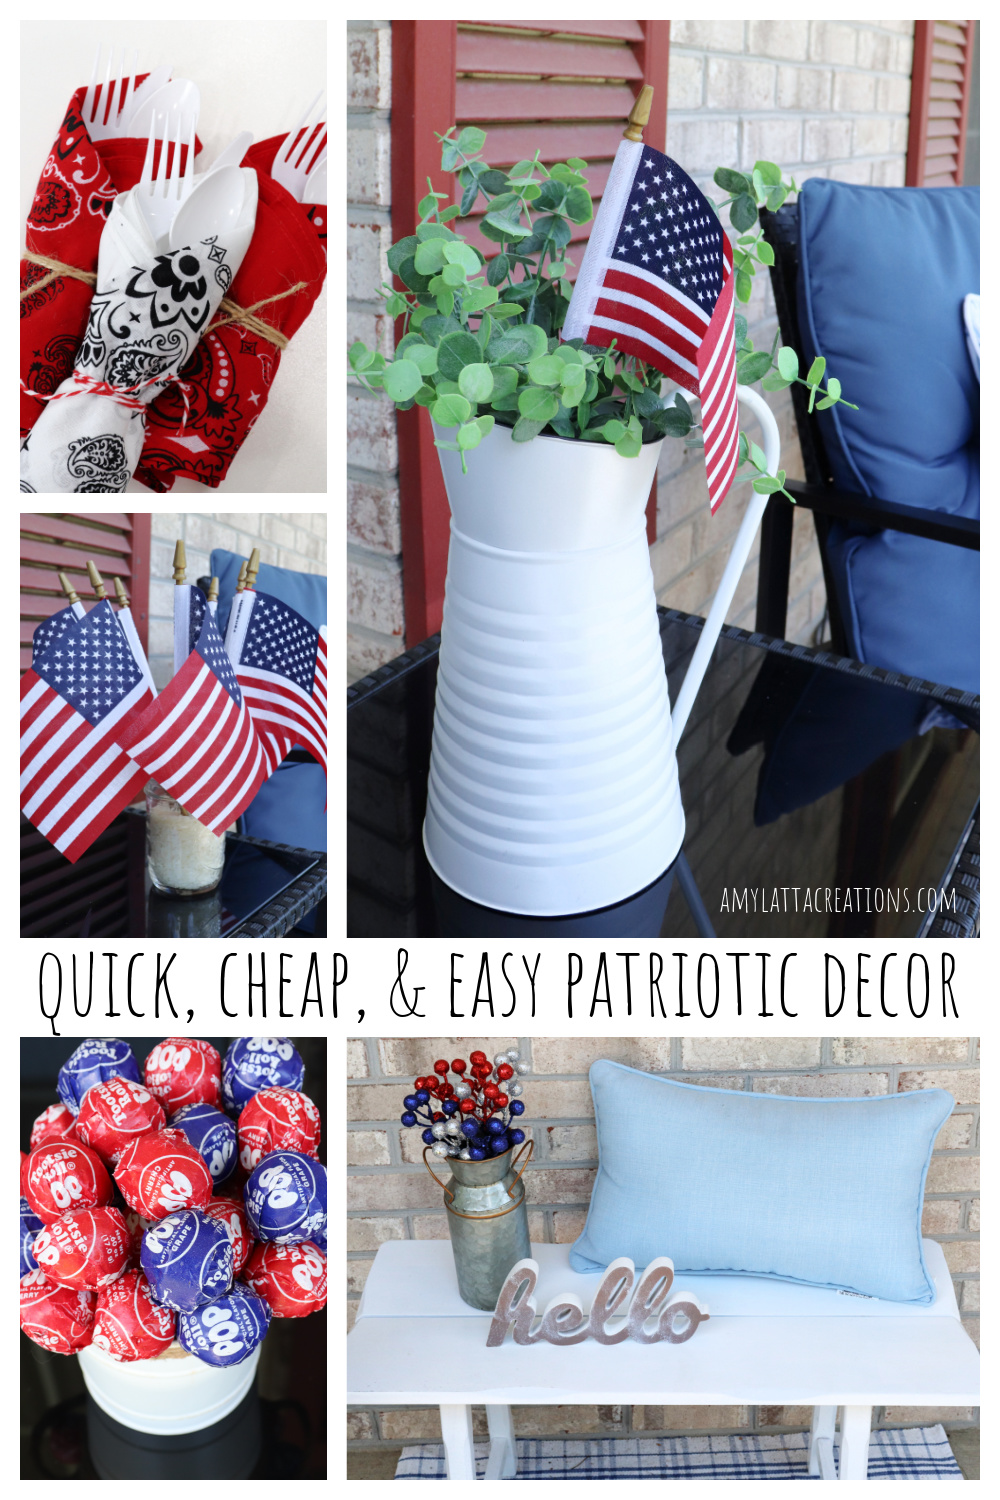 Image is a collage of patriotic decor ideas.